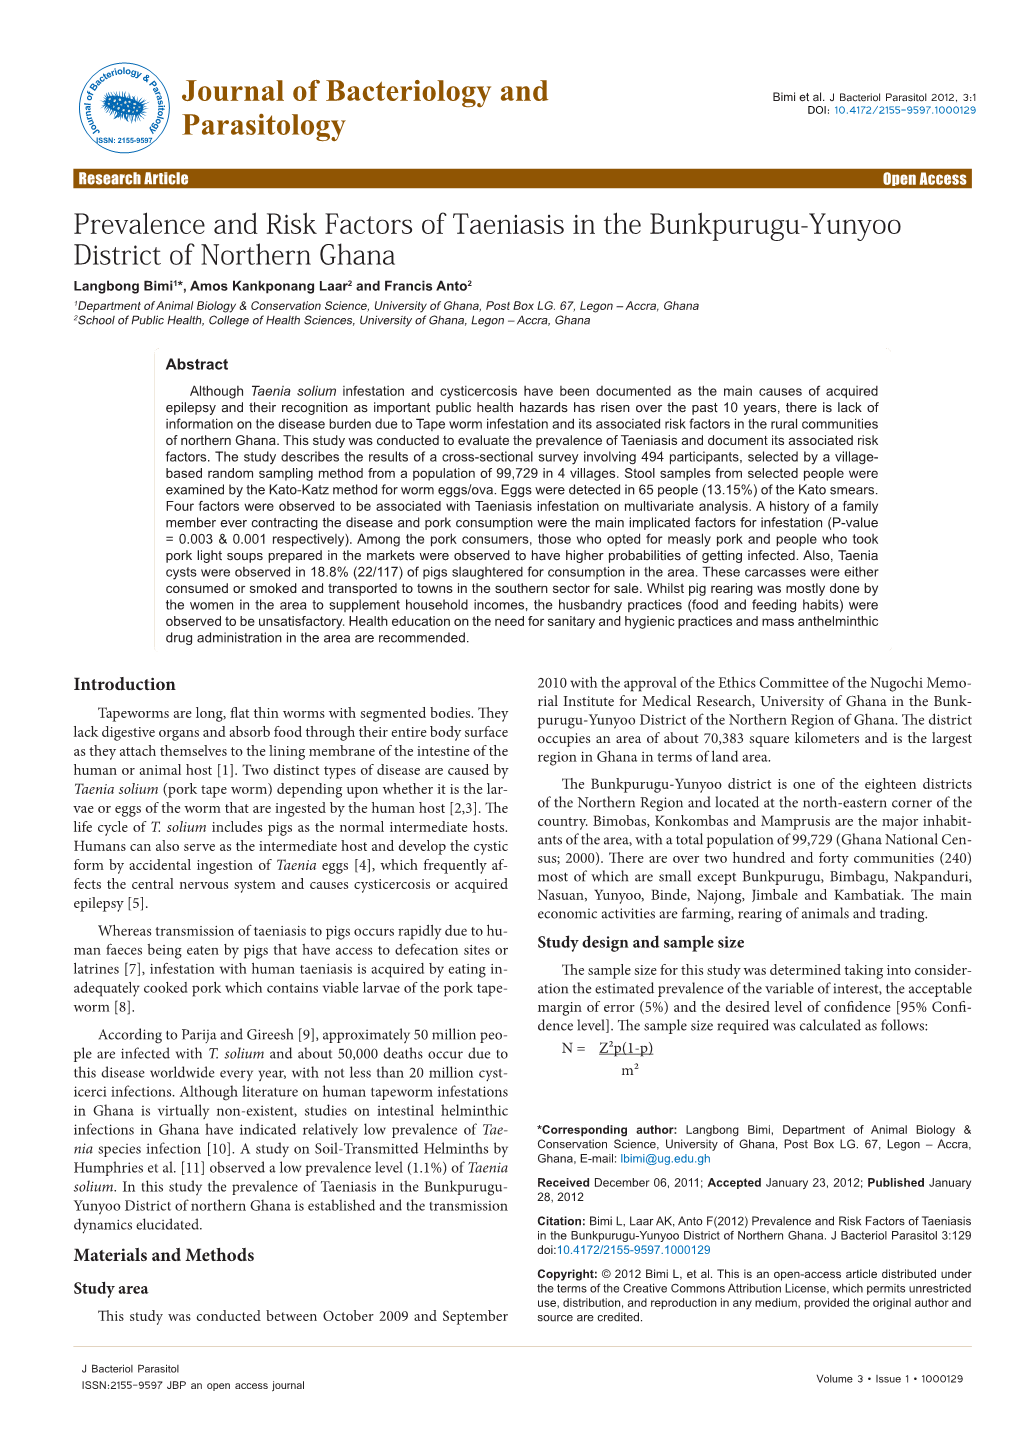 Prevalence and Risk Factors of Taeniasis in the Bunkpurugu-Yunyoo District of Northern Ghana